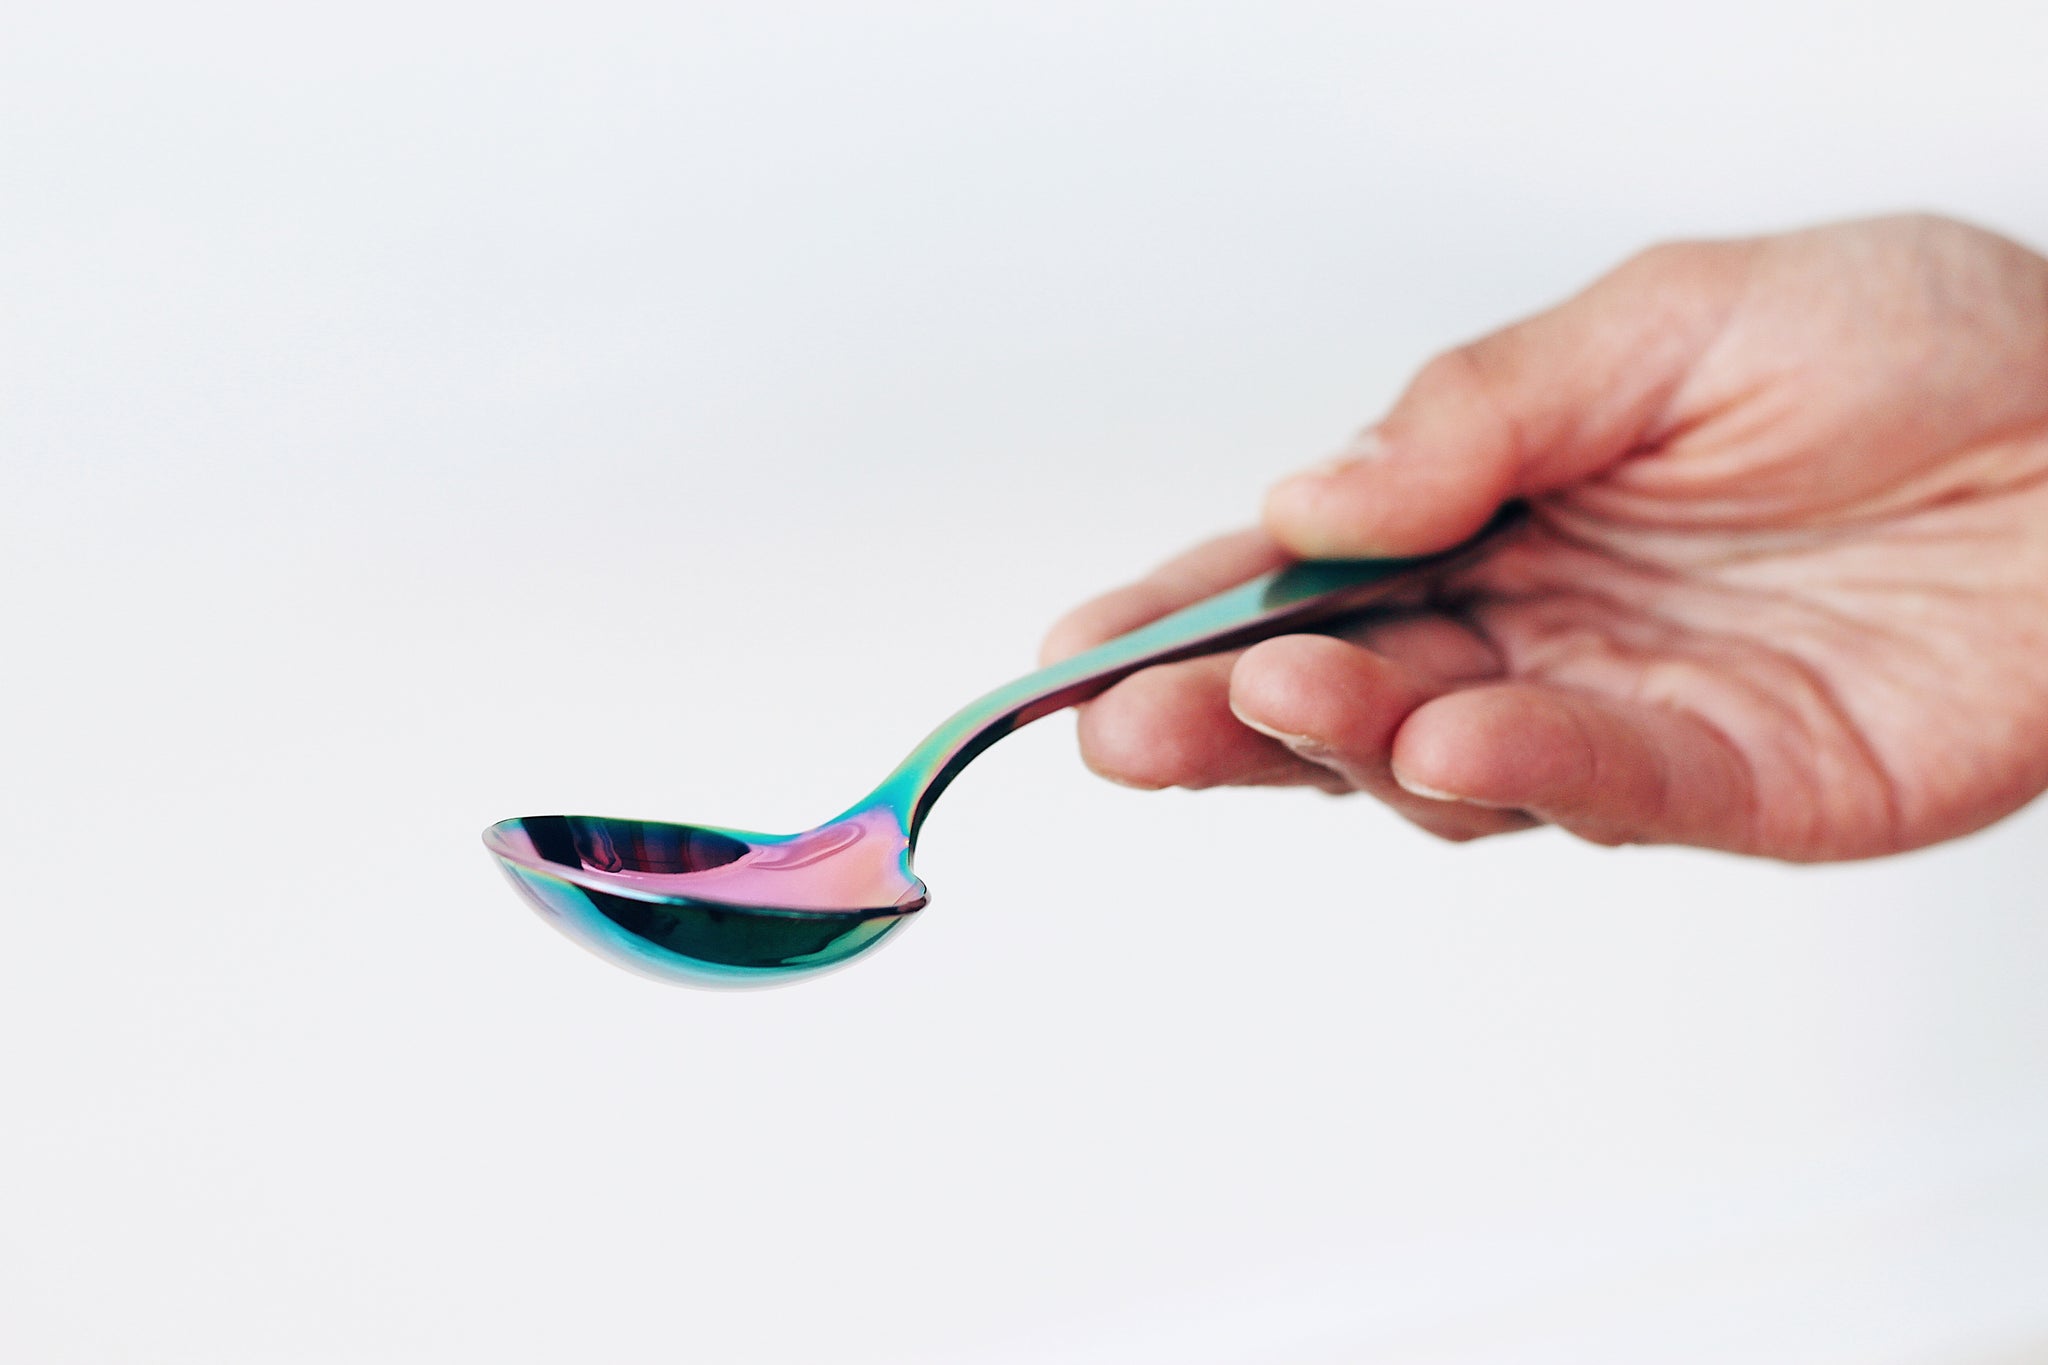 The Little Dipper: Rainbow | Umeshiso Cupping Spoon